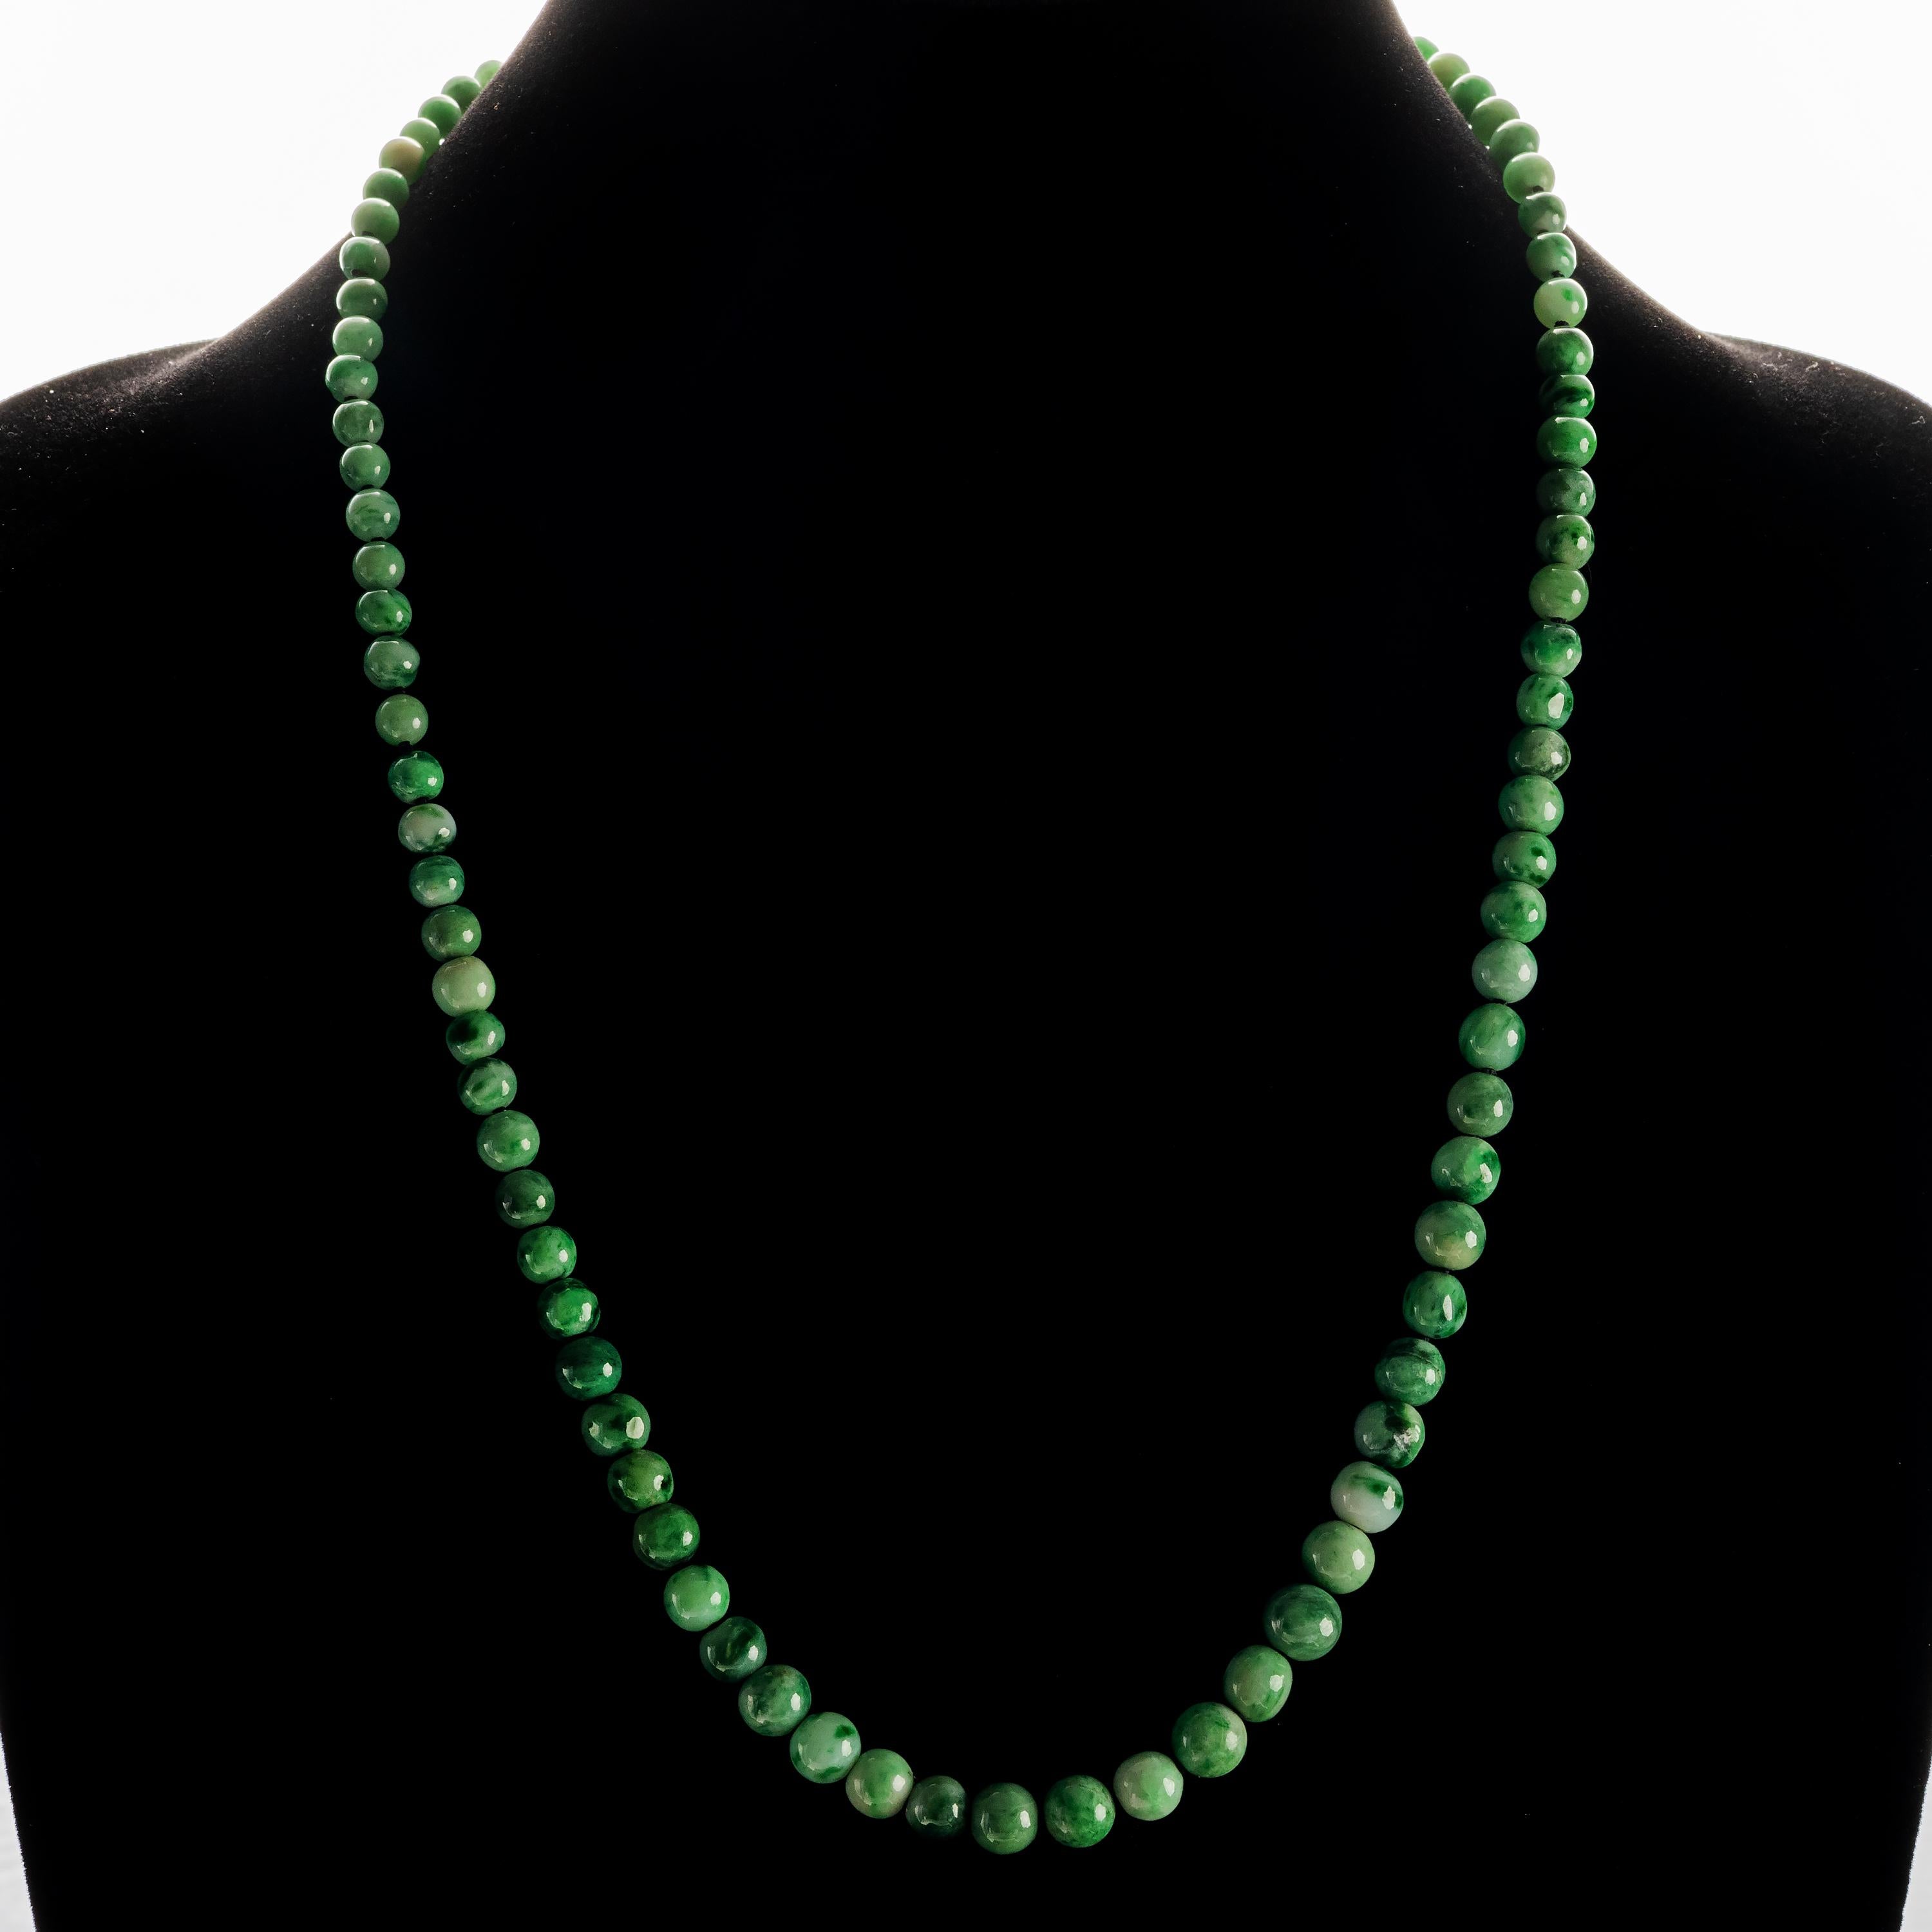 Bead Jade Necklace circa 1930s Variegated Green Certified Untreated